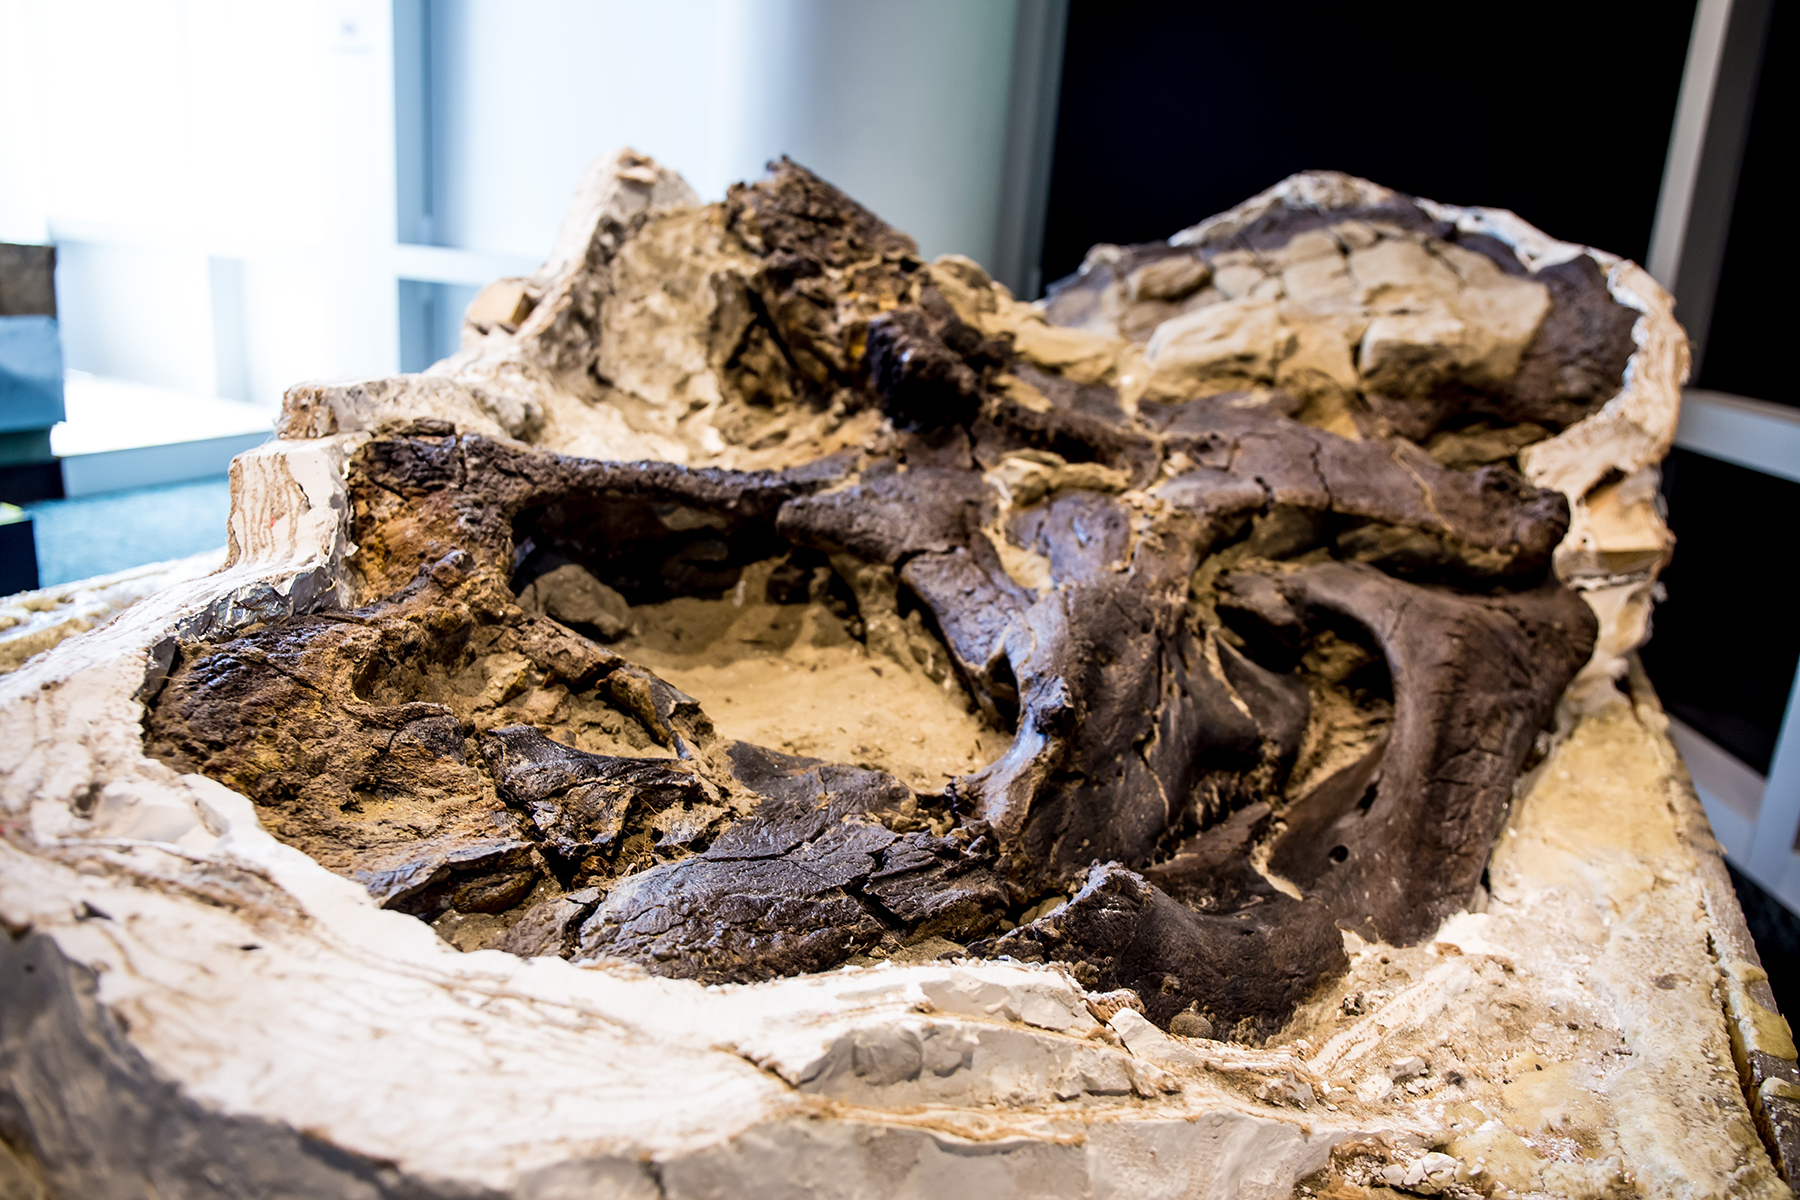 One of the various fossil blocks for the exhibit includes the skull of a roughly 67-million-year-old Triceratops. (Photograph courtesy Matt Zeher)